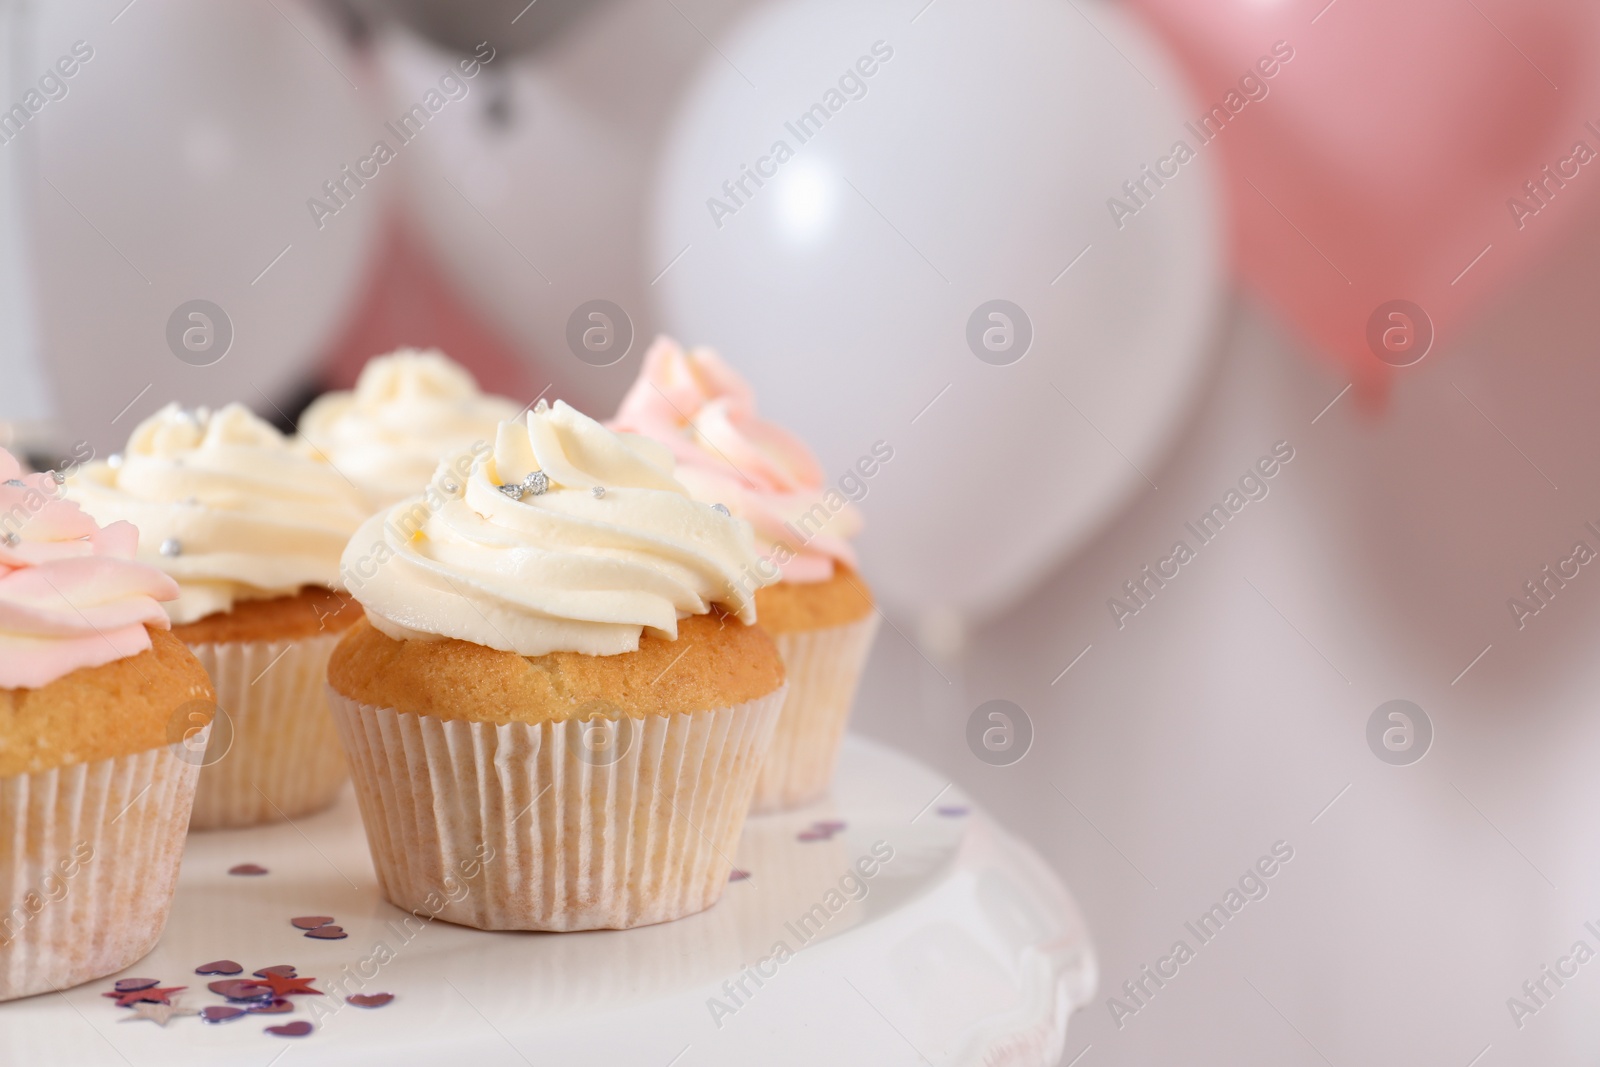 Photo of Stand with cupcakes and blurred balloons on background, closeup